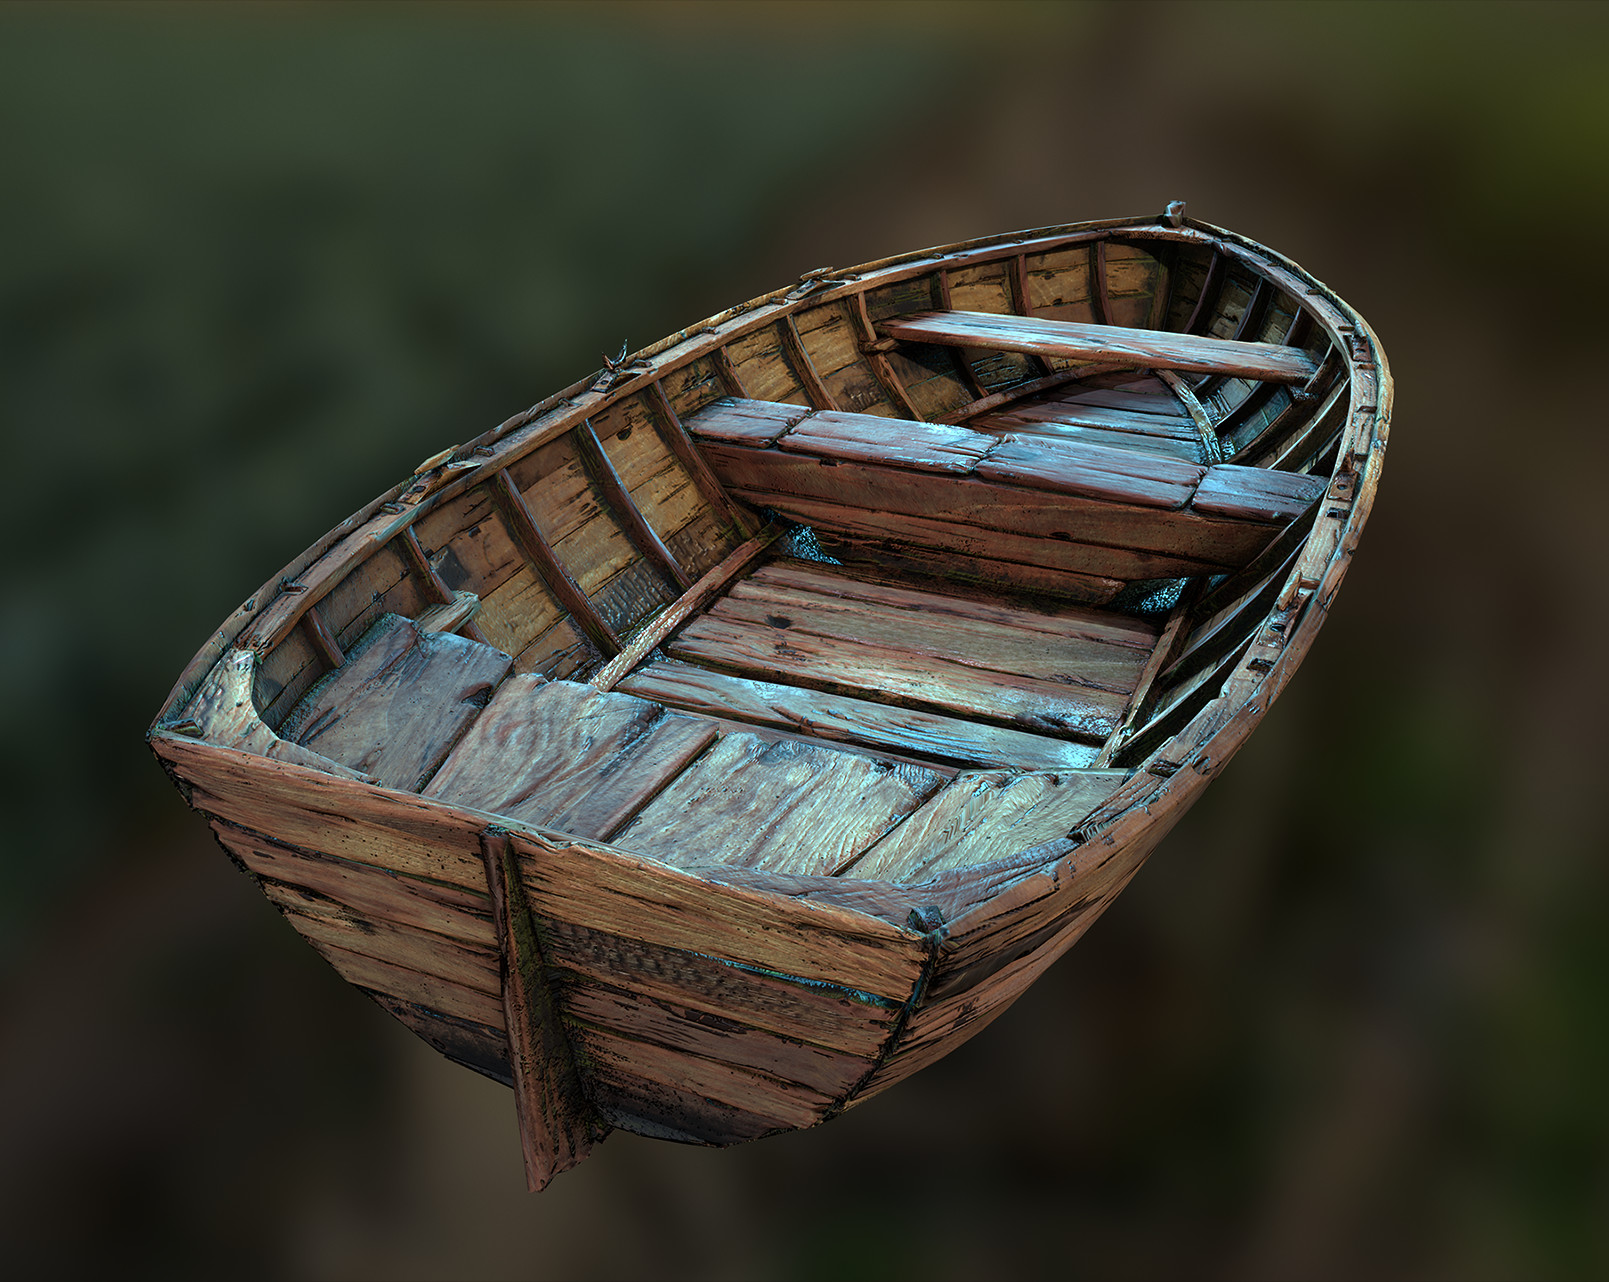 free old wood boats